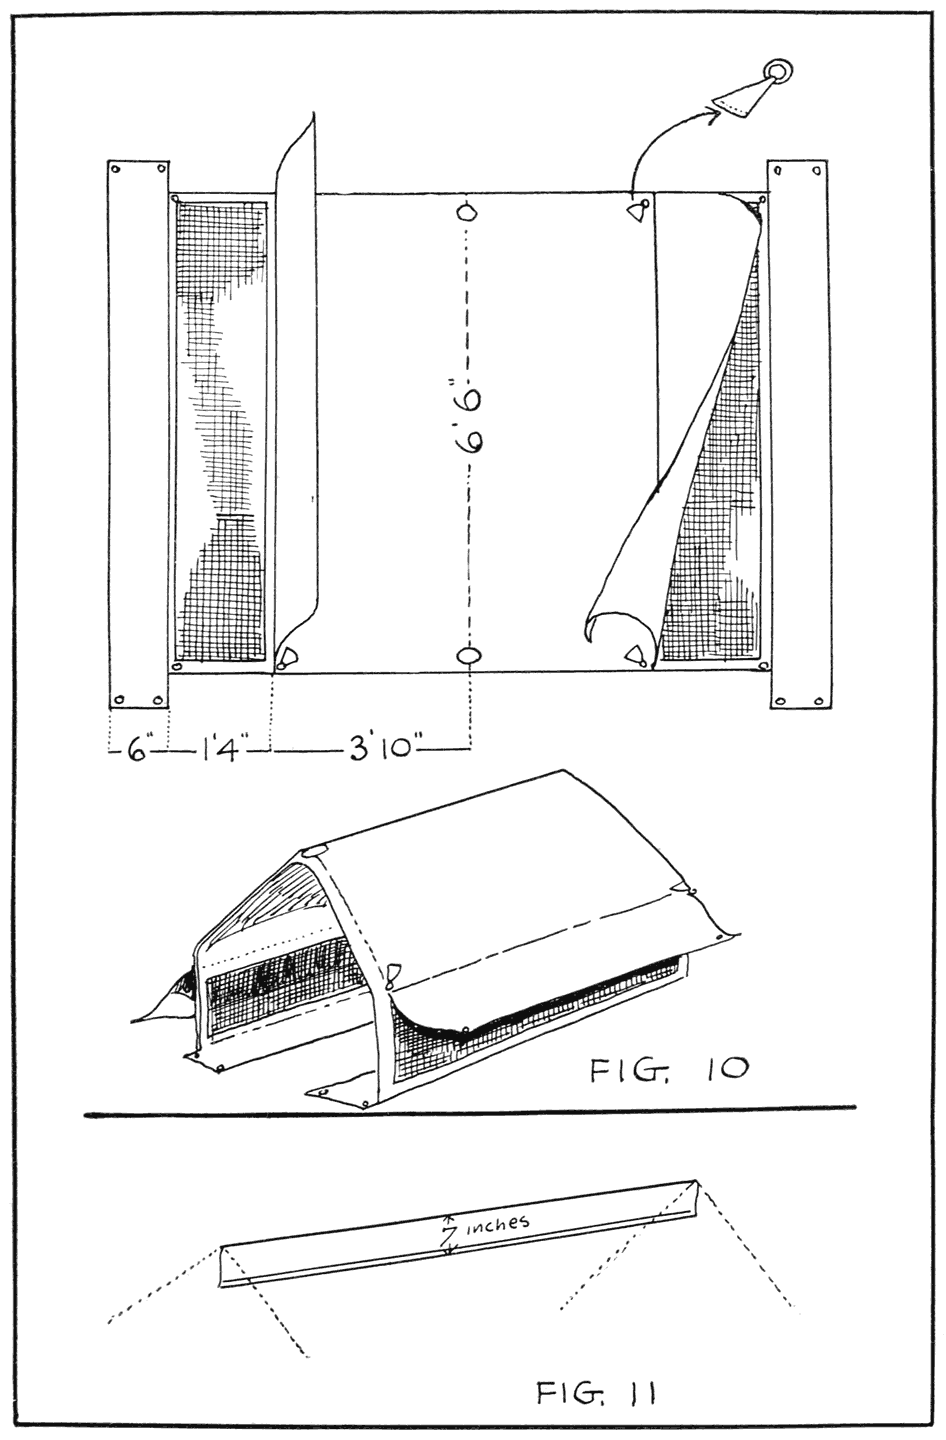 Tent pattern of home-made camping outfit. Note in the upper part
of Fig. 10 the little tab sewed on at the tent corner, holding the
ring to which the side guy ropes are secured. Another feature is
the mosquito netting inside flaps which permit free circulation of
air. Fig. 11 is a strip of canvas along the ridge which, with pins or
clips, serves as a hanger for clothes.